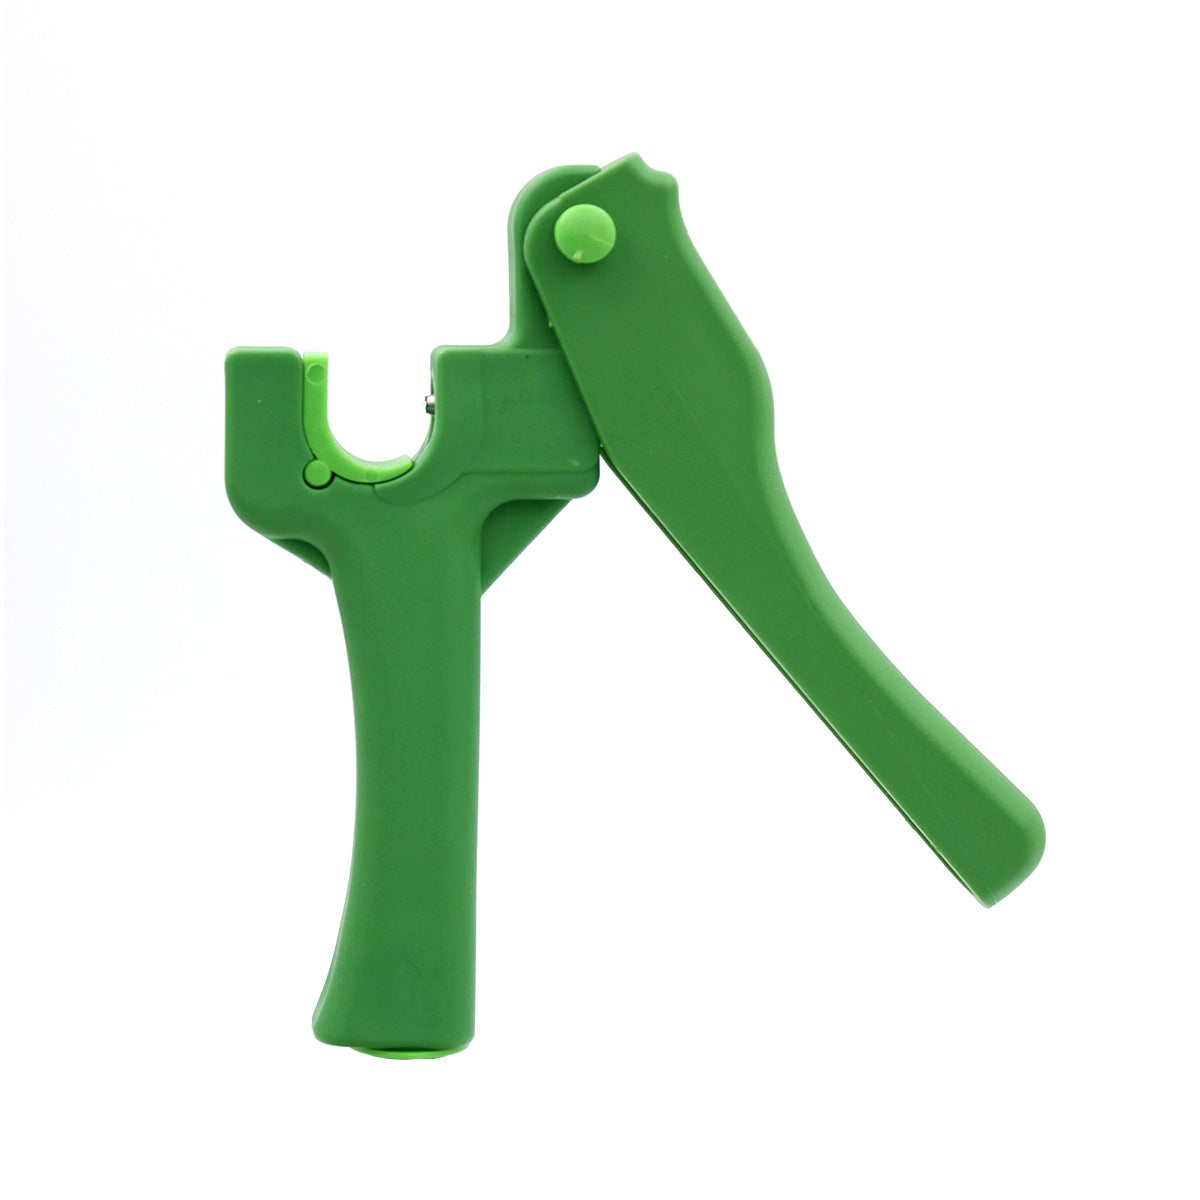 FLORA PUNCHER FOR MICRO DRIPPER STAKE ASSEMBLIES | 1/4" HOLE PUNCH